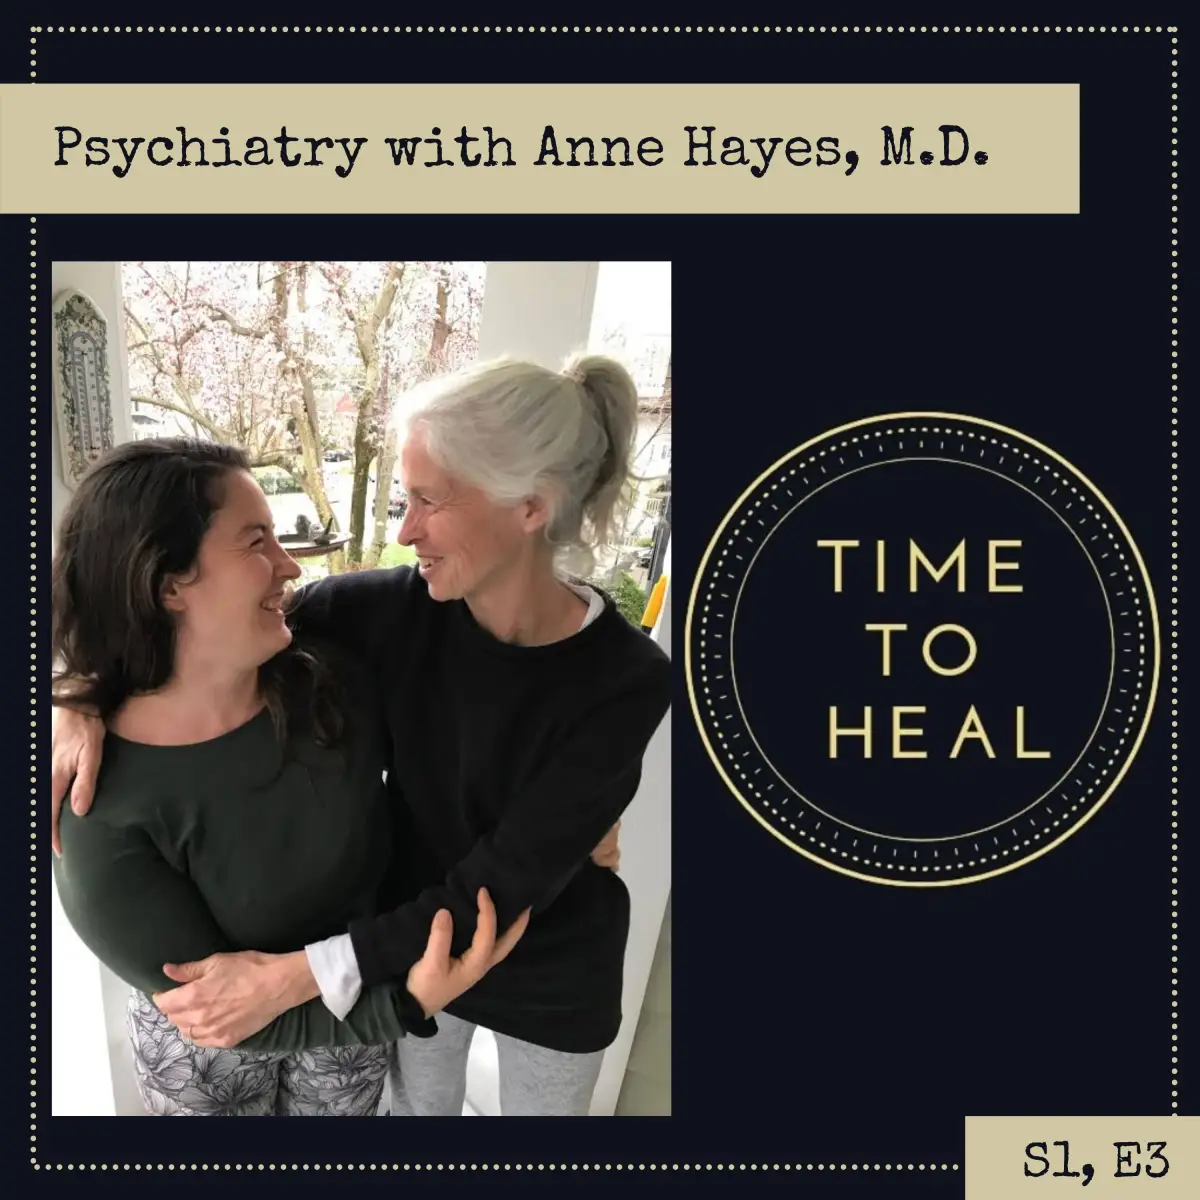 Psychiatry with Anne Hayes, M.D.